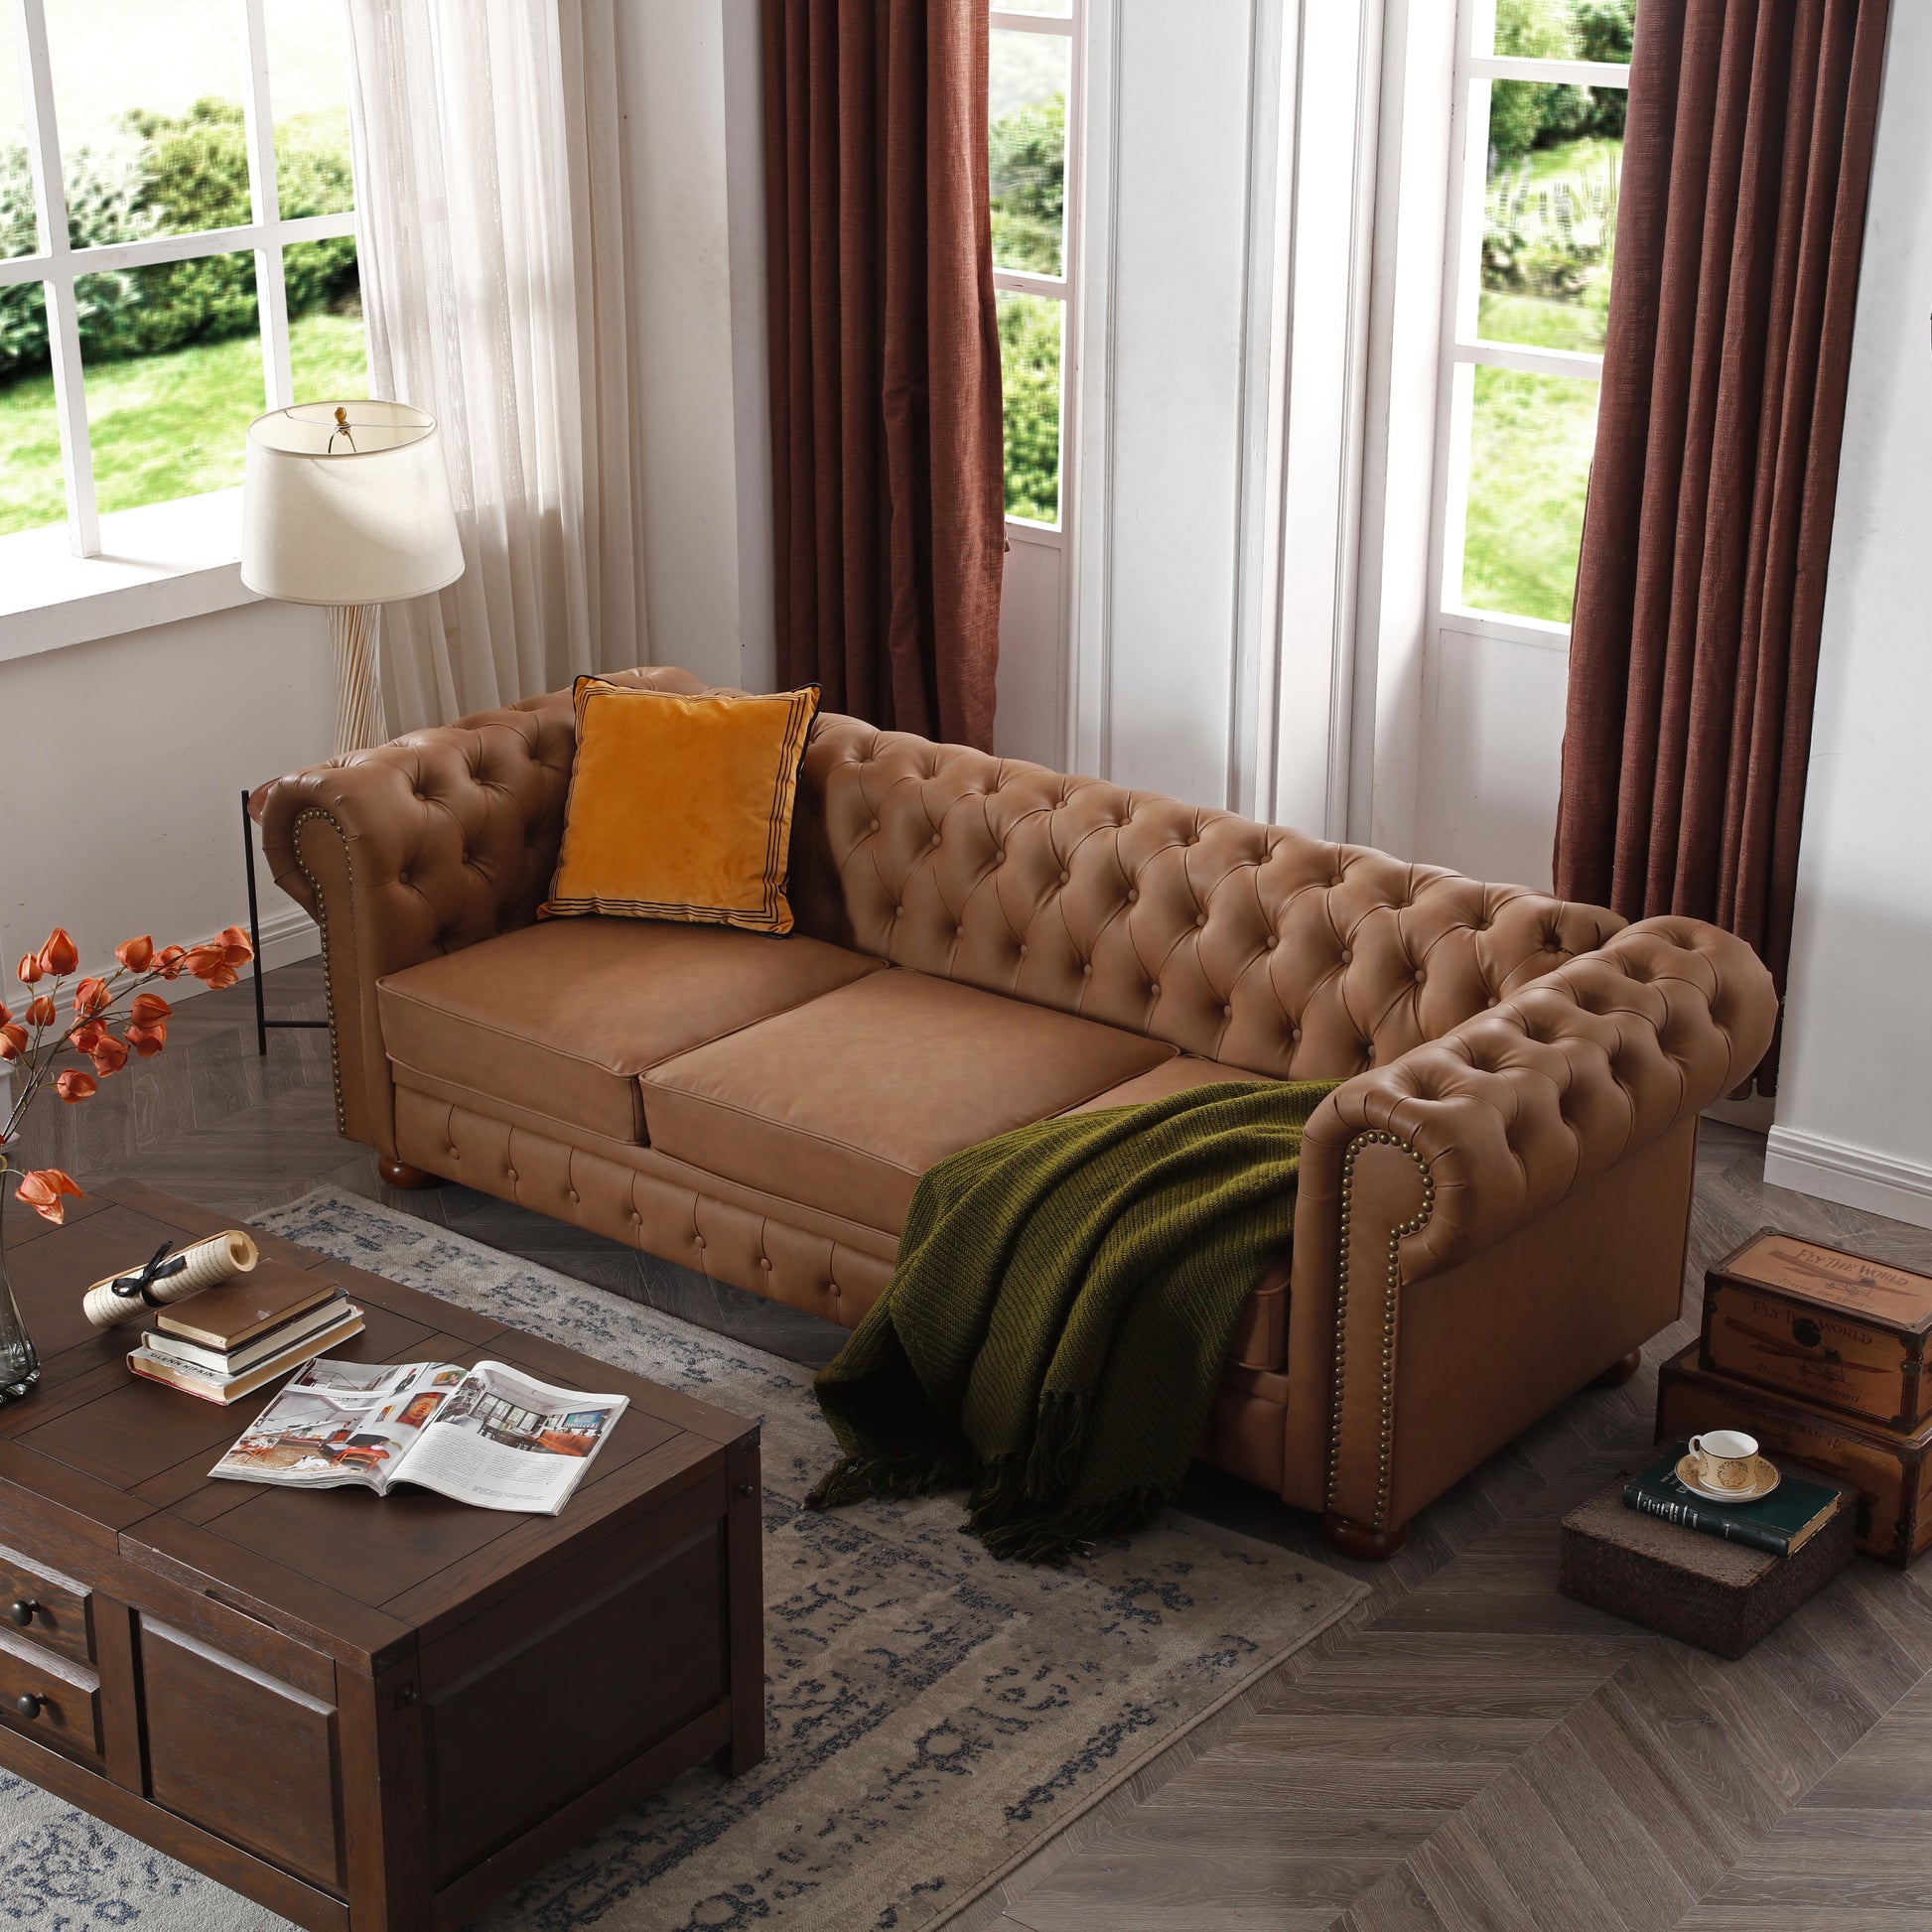 Classic Chesterfield Sofa Brown Faux Leather brown-foam-technical leather